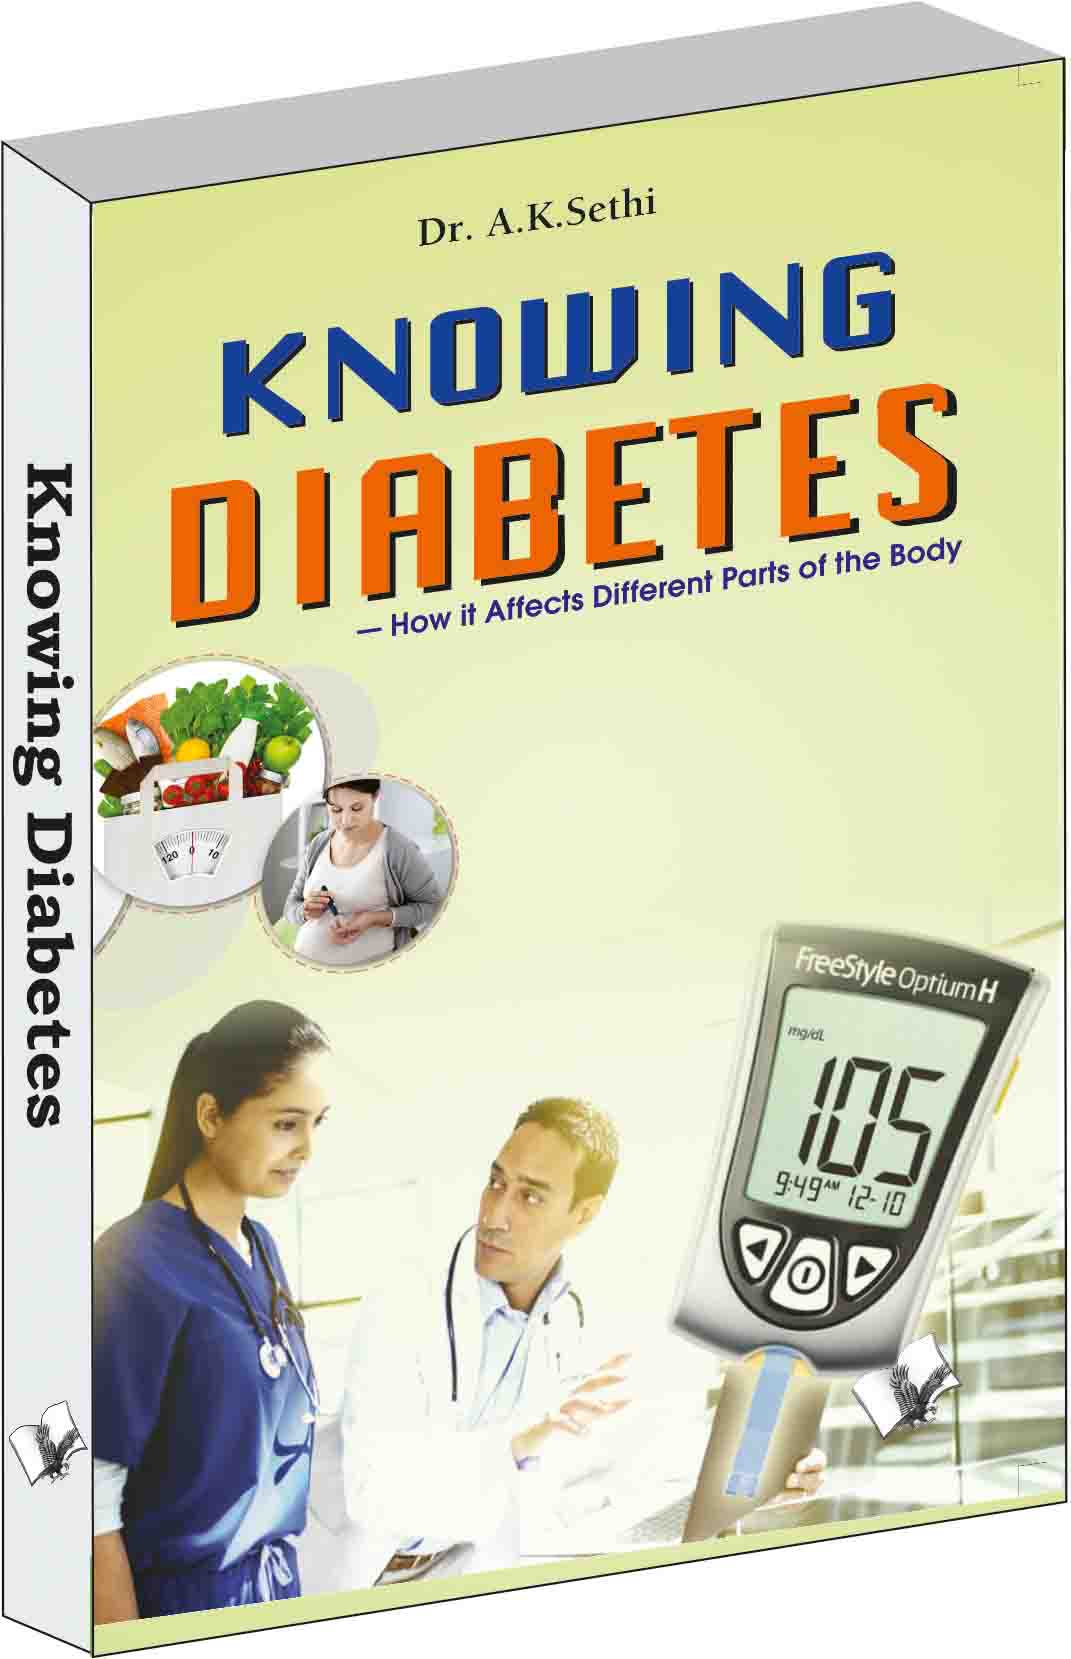 Knowing diabetes -How it affects different parts of the body